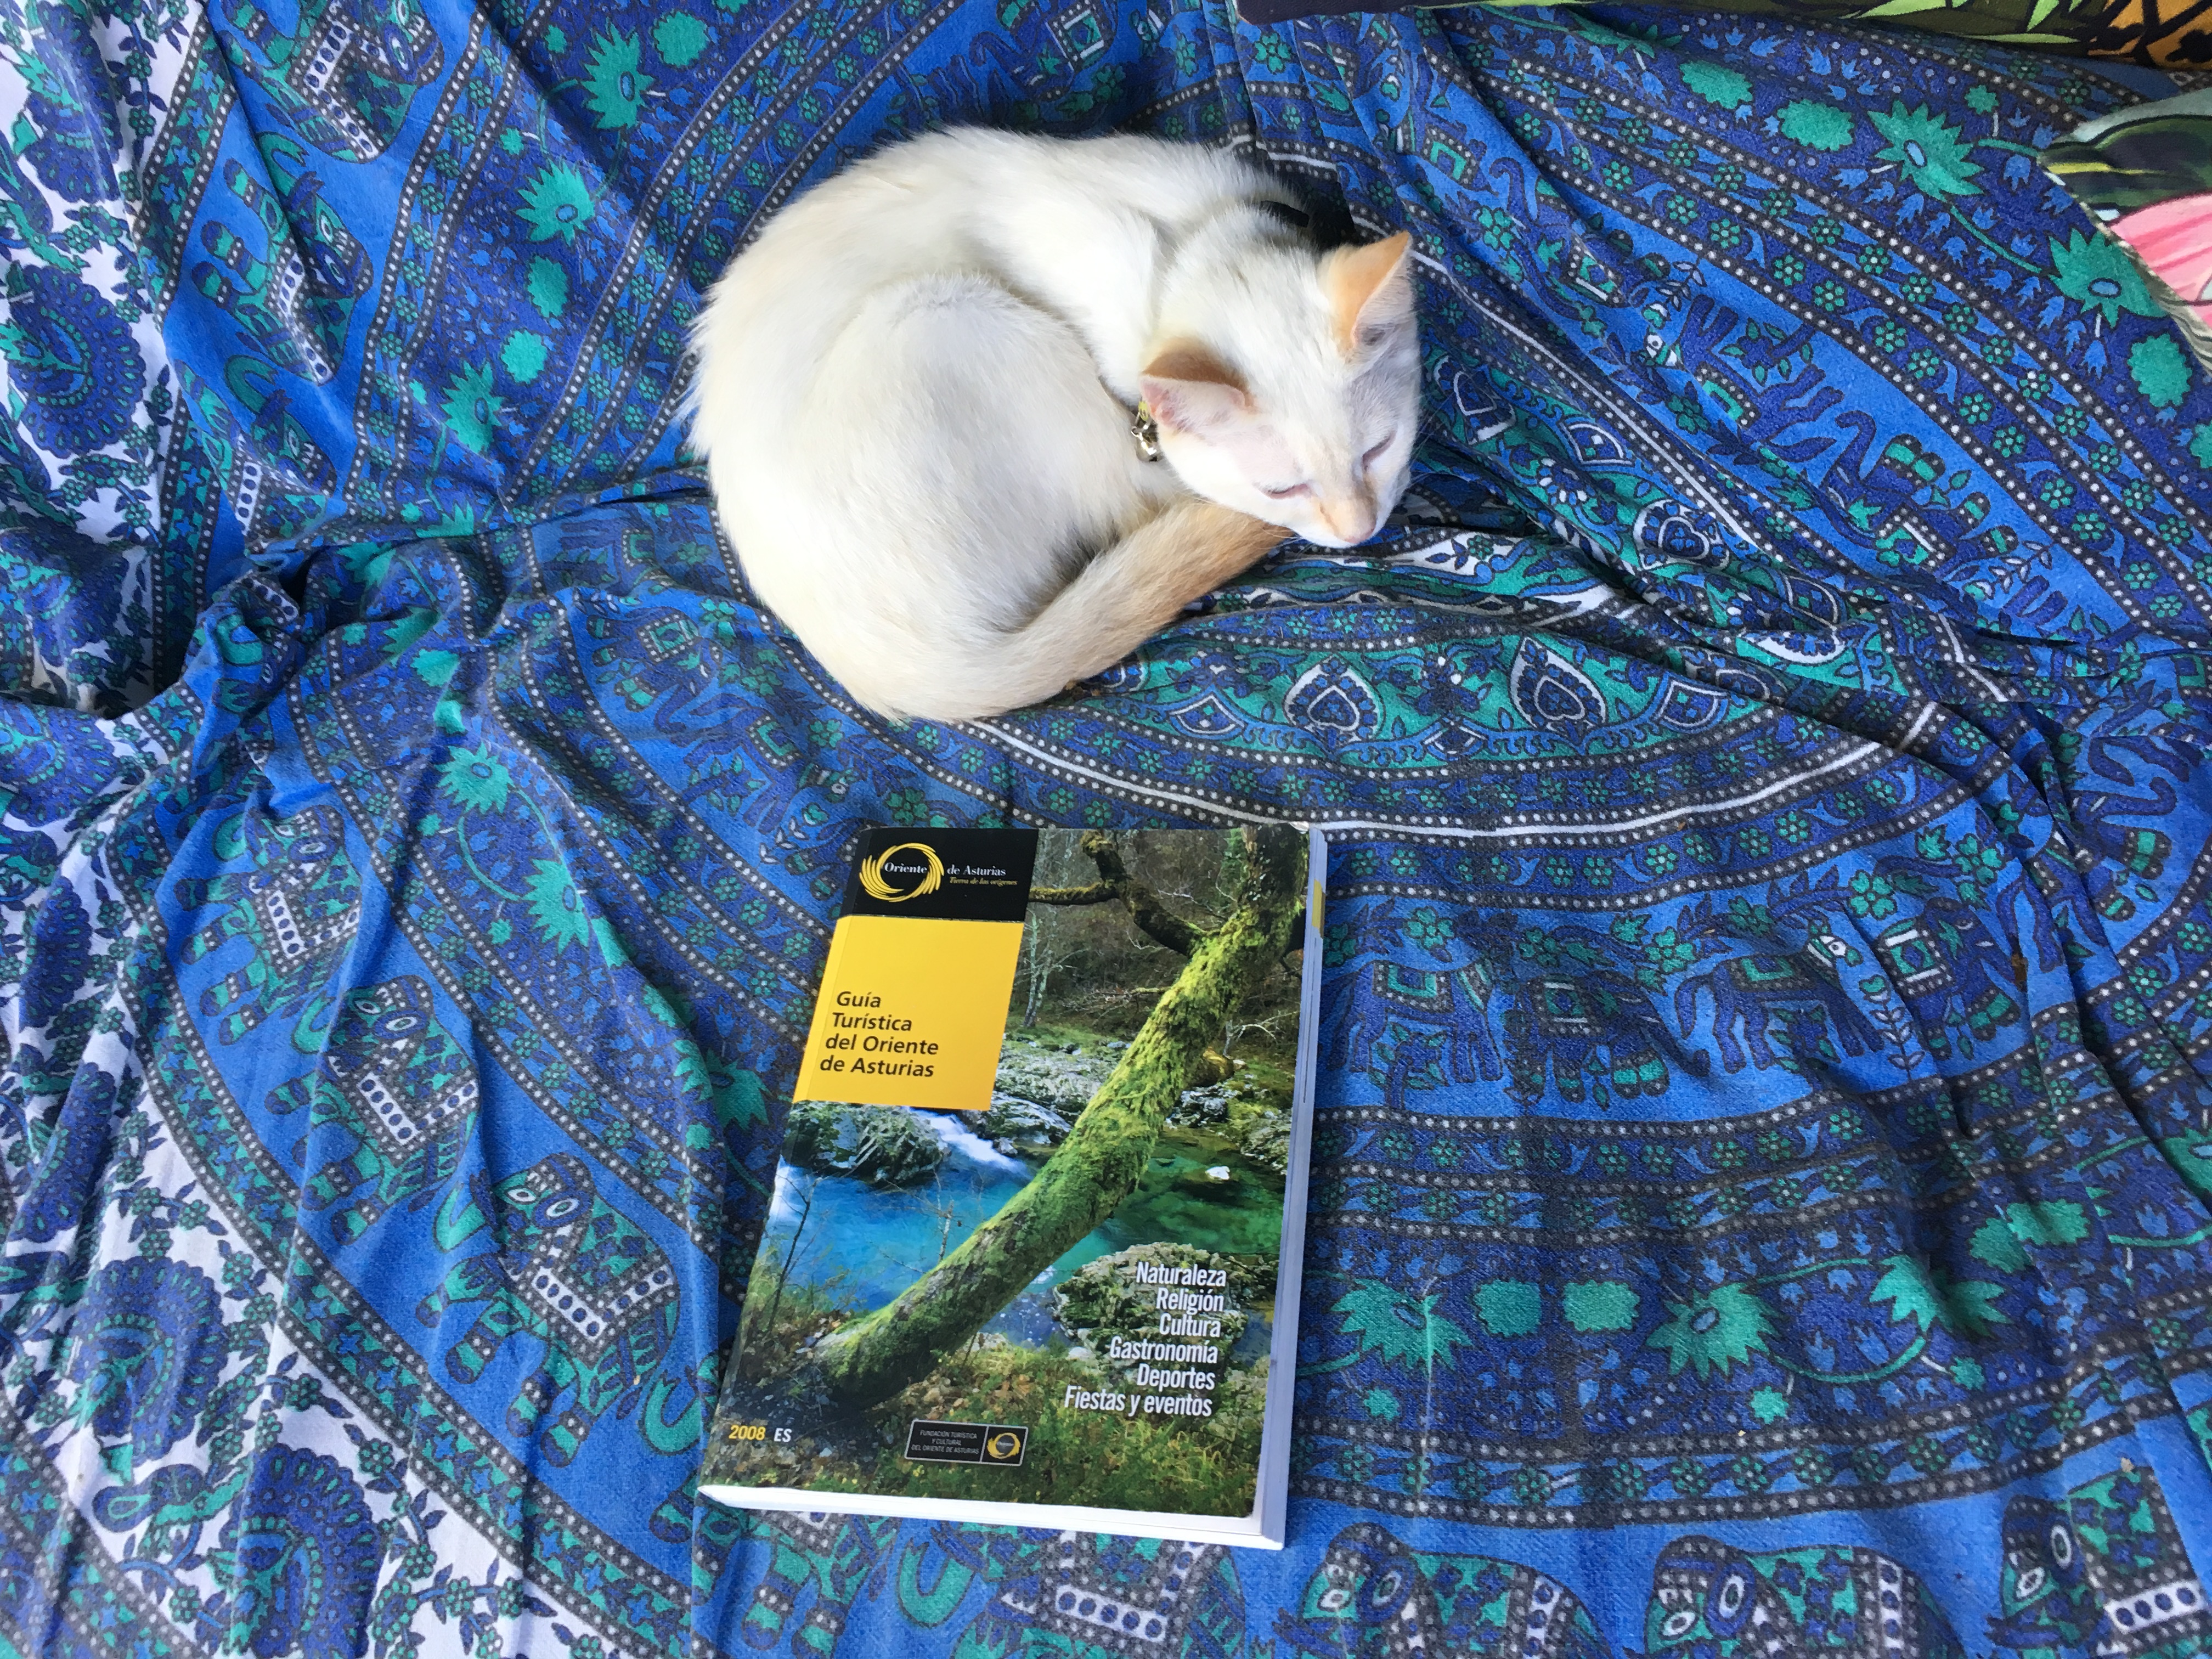 Cute white kitten curled up next to a guide book for Asturias Spain